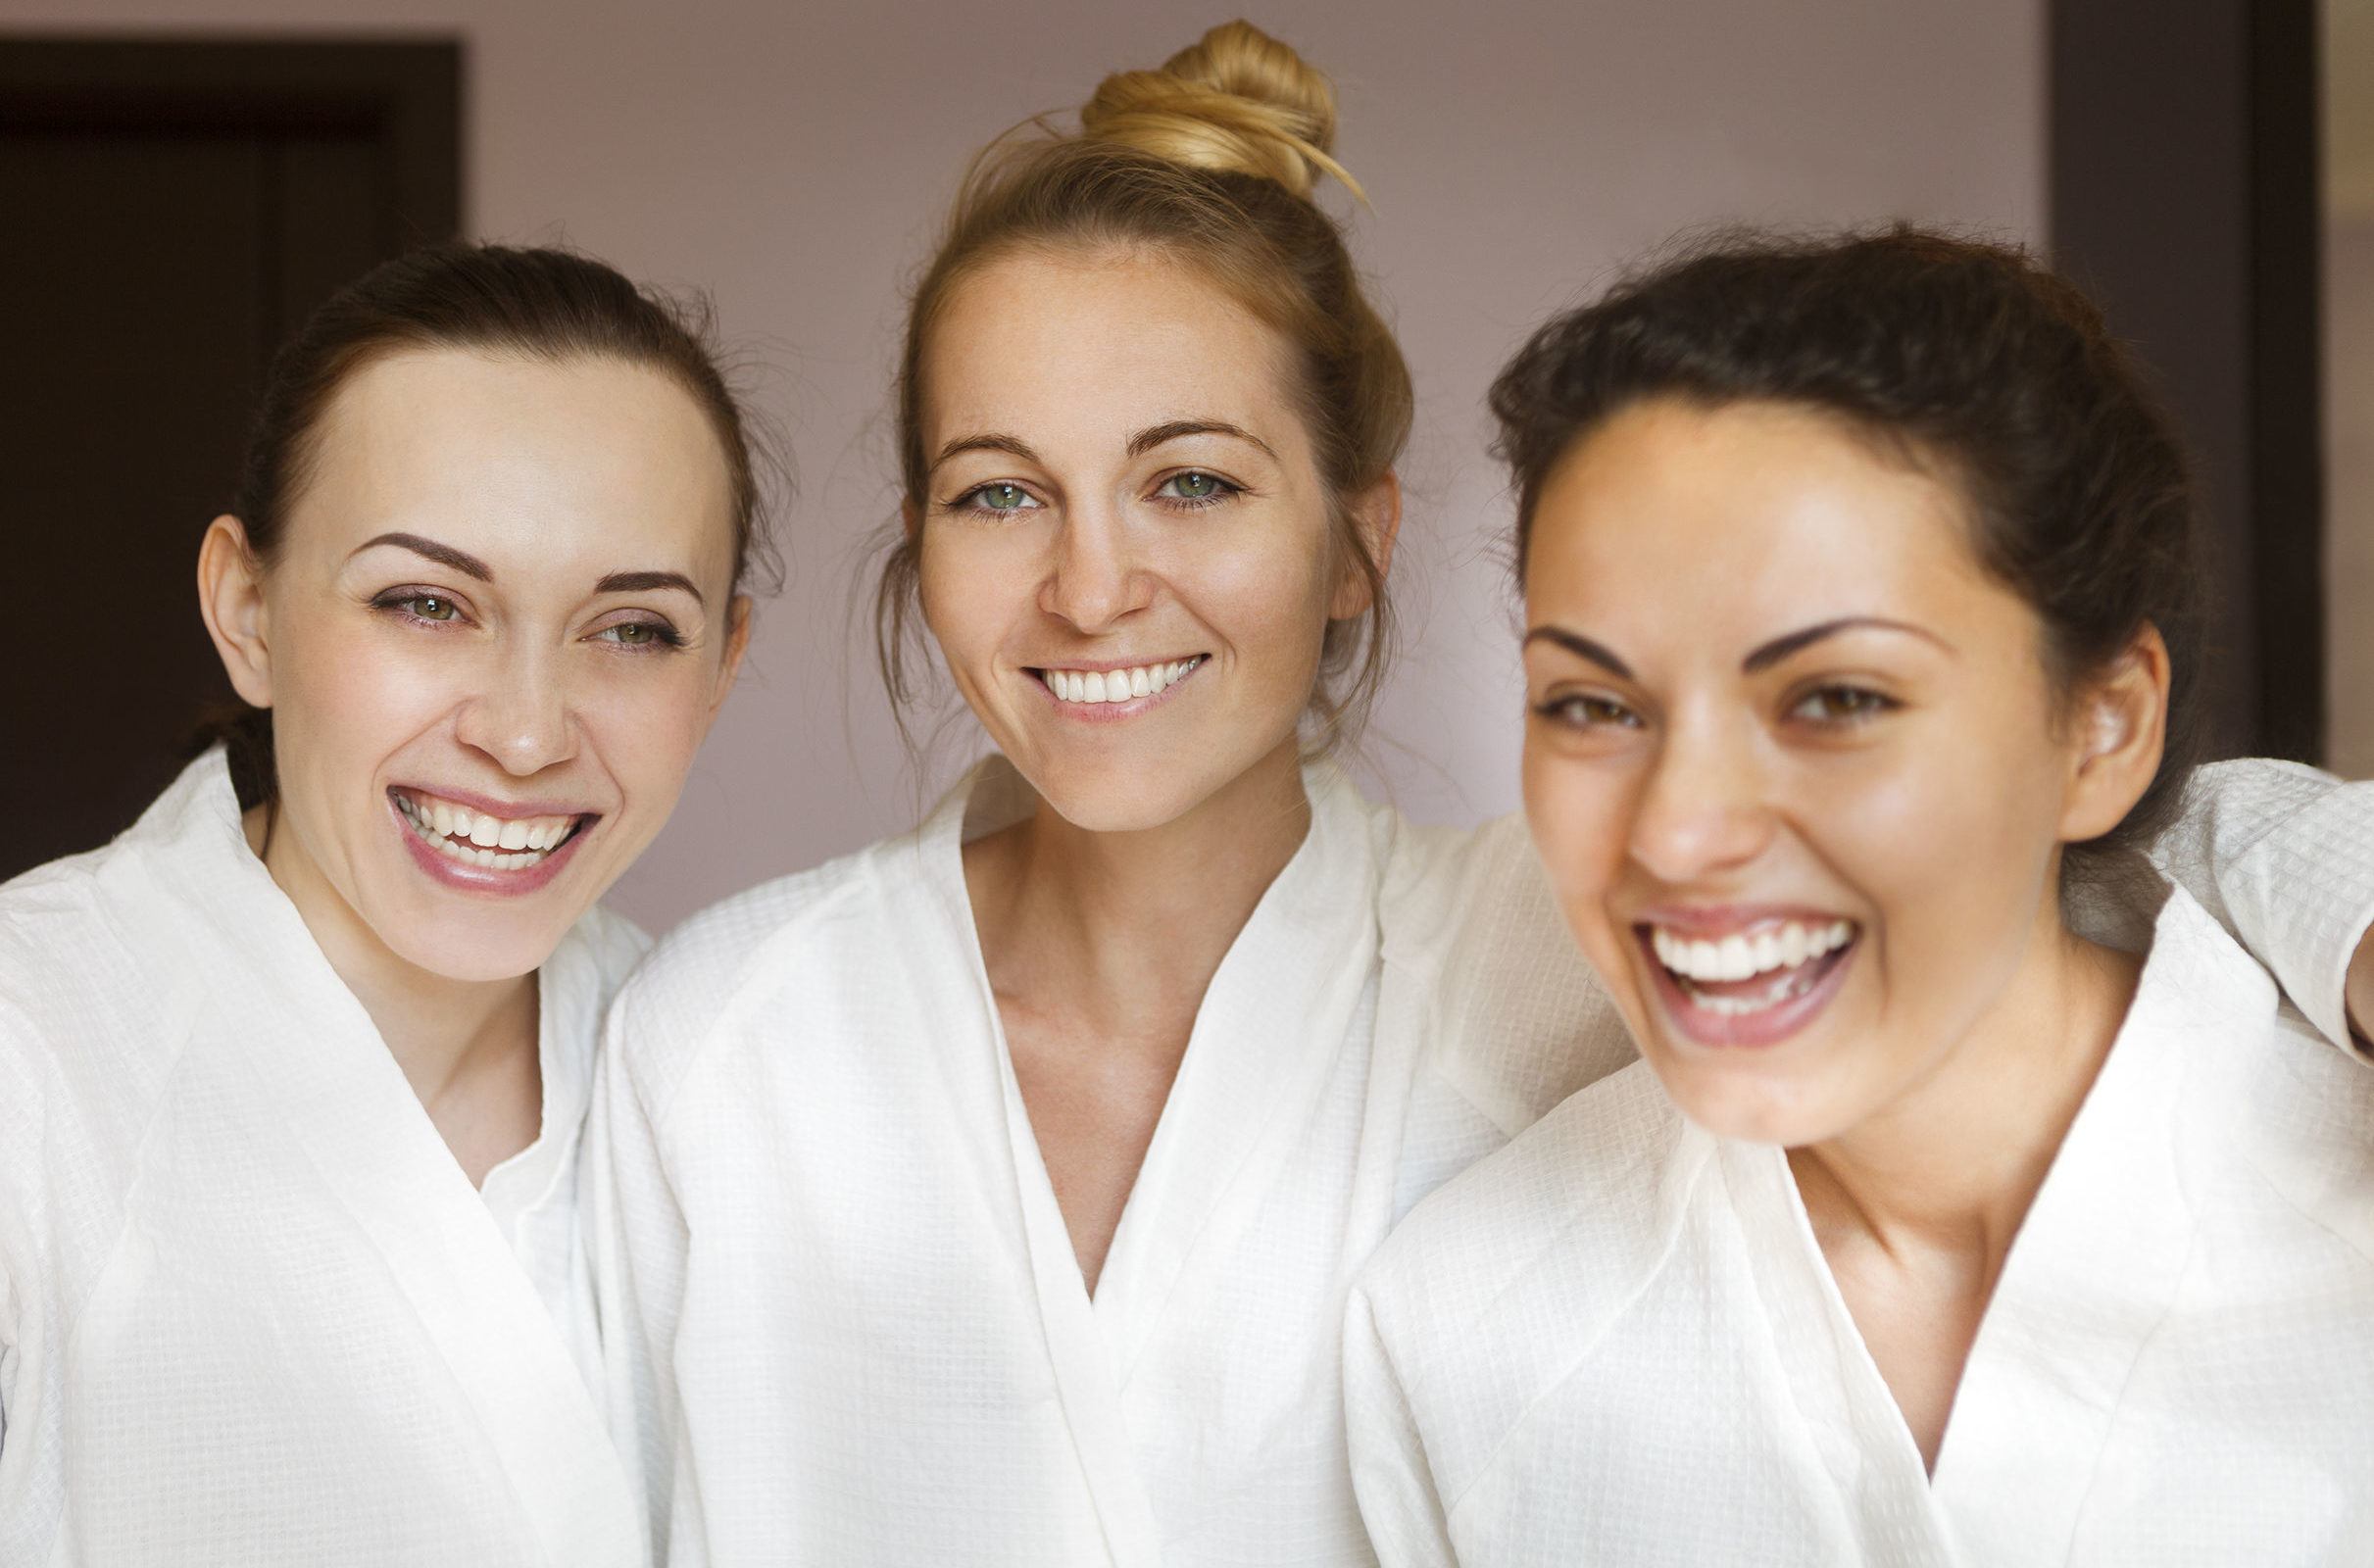 Get the most out of our Chattanooga wellness spa with membership